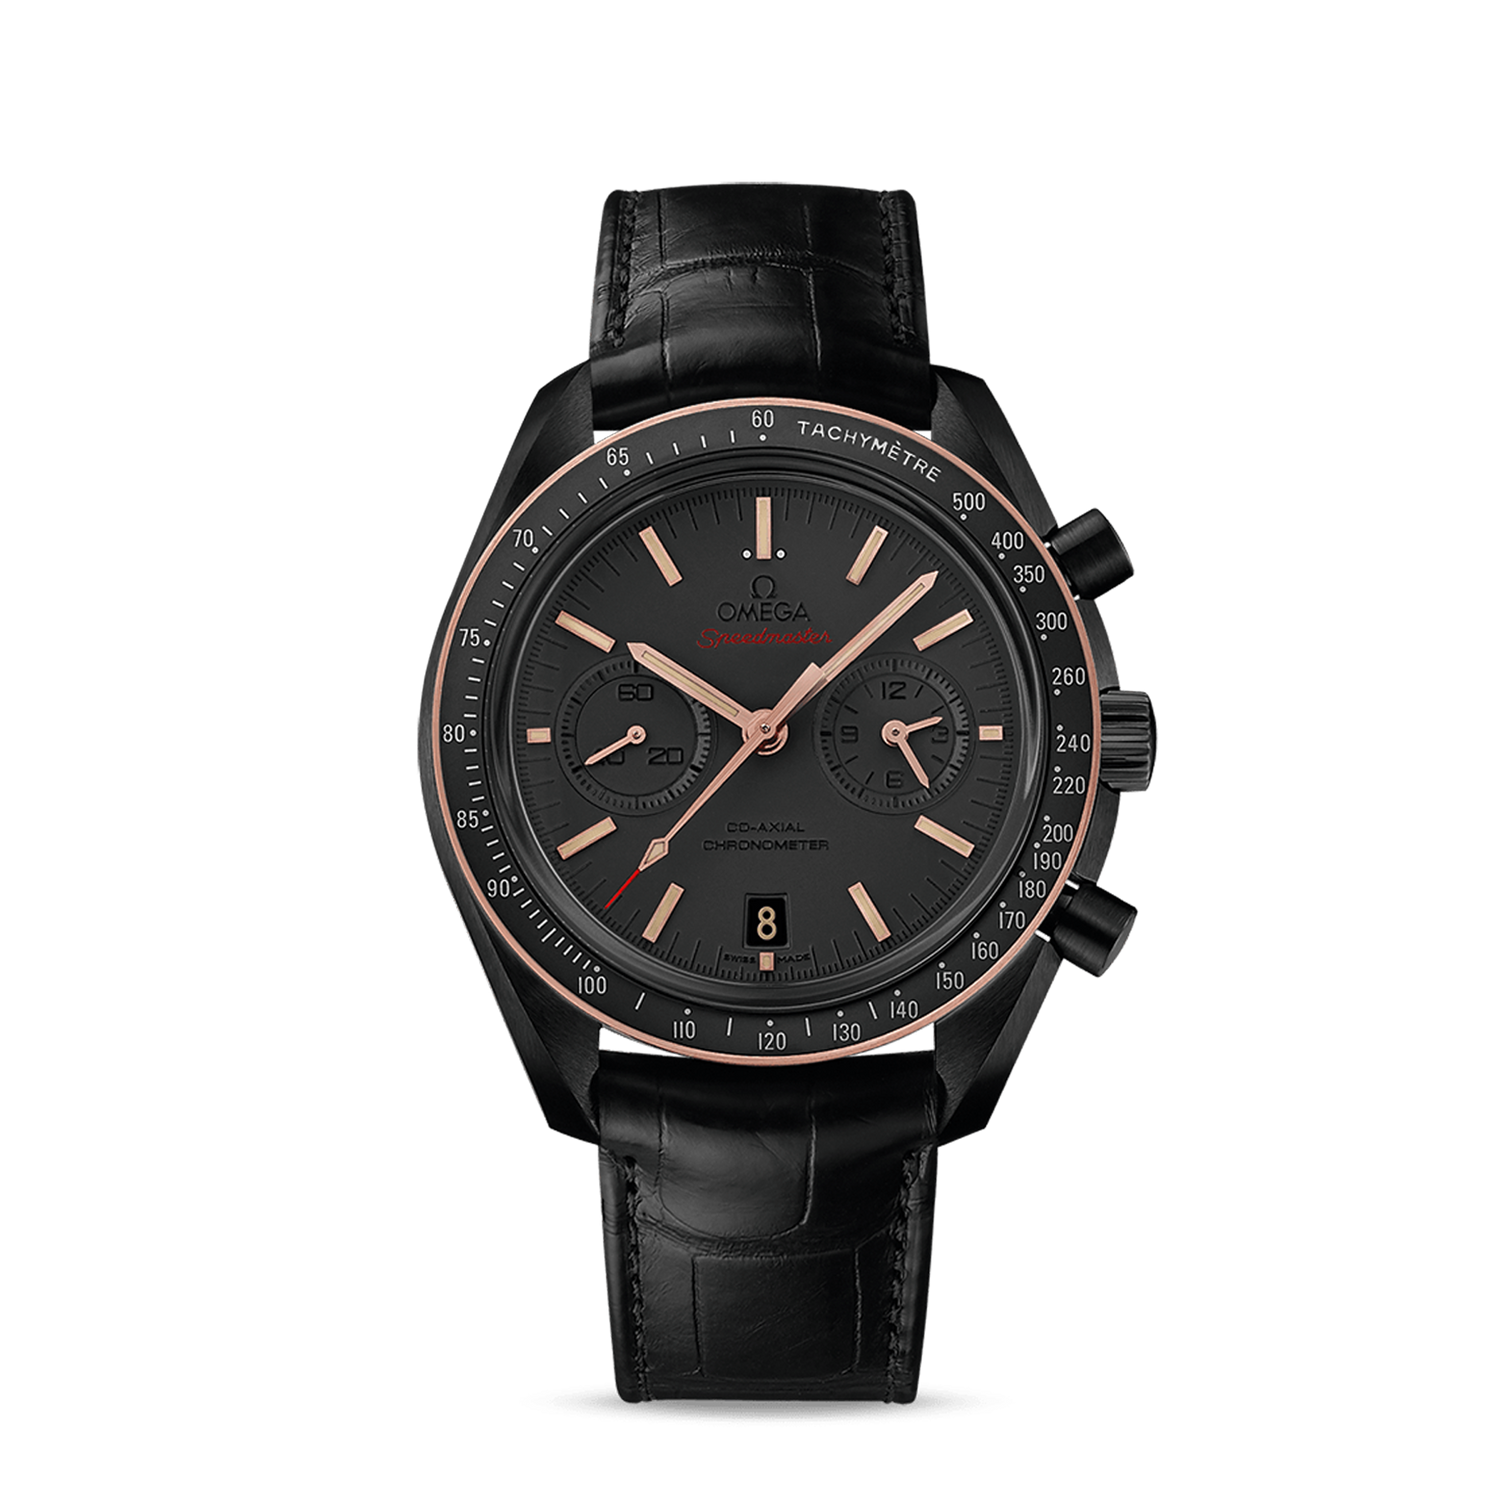 Omega DARK SIDE OF THE MOON CO‑AXIAL CHRONOMETER CHRONOGRAPH 311.63.44.51.06.001